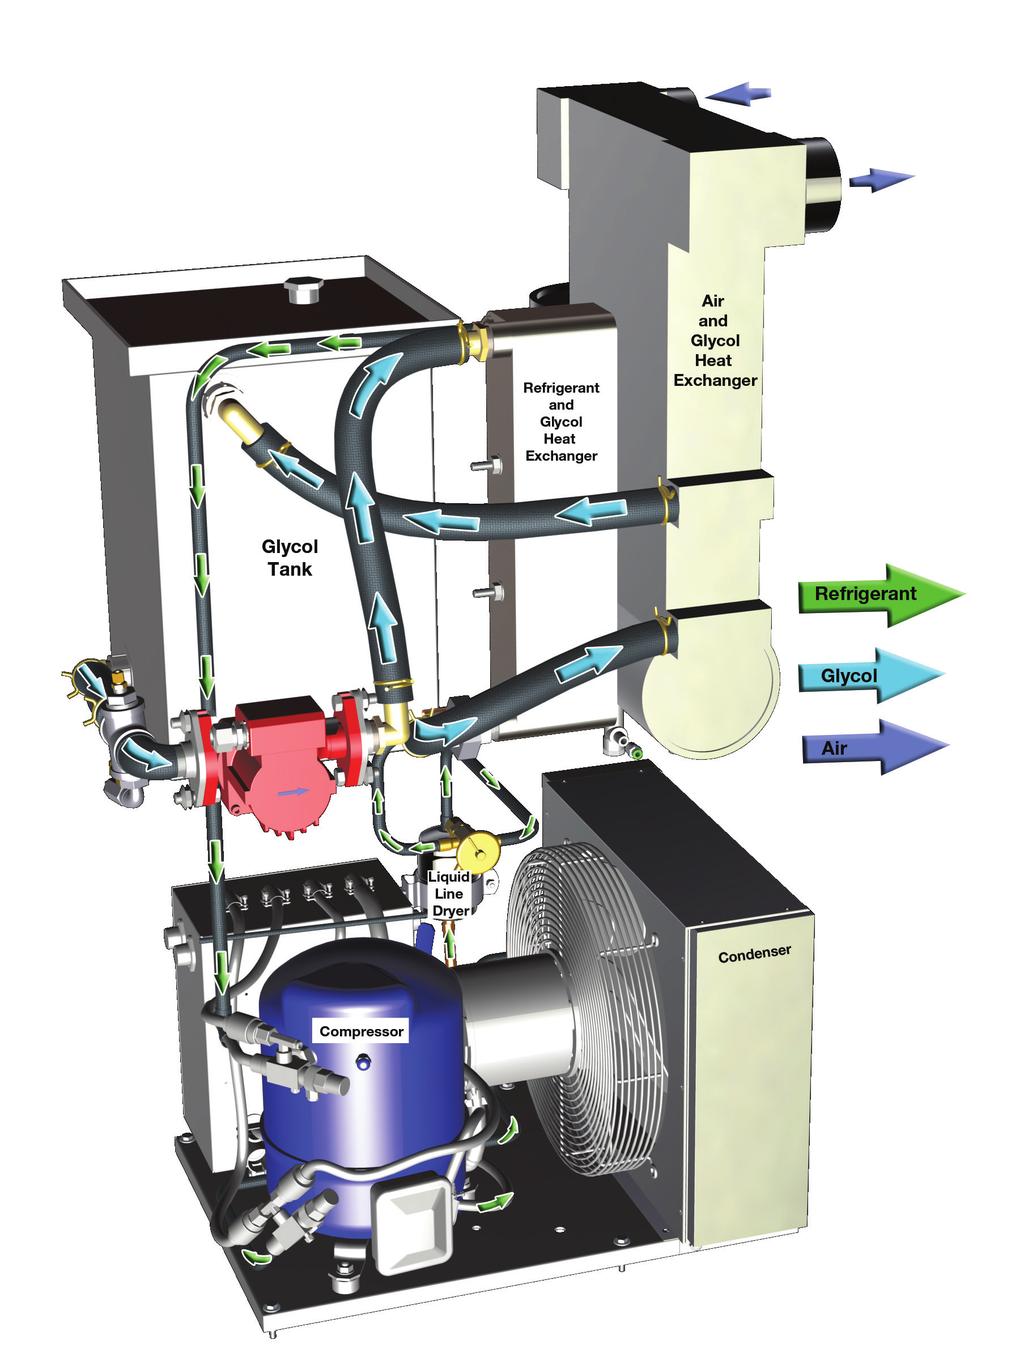 Parker Thermal Mass (PTM) - How it works There are three circuits: air, glycol, and refrigerant.